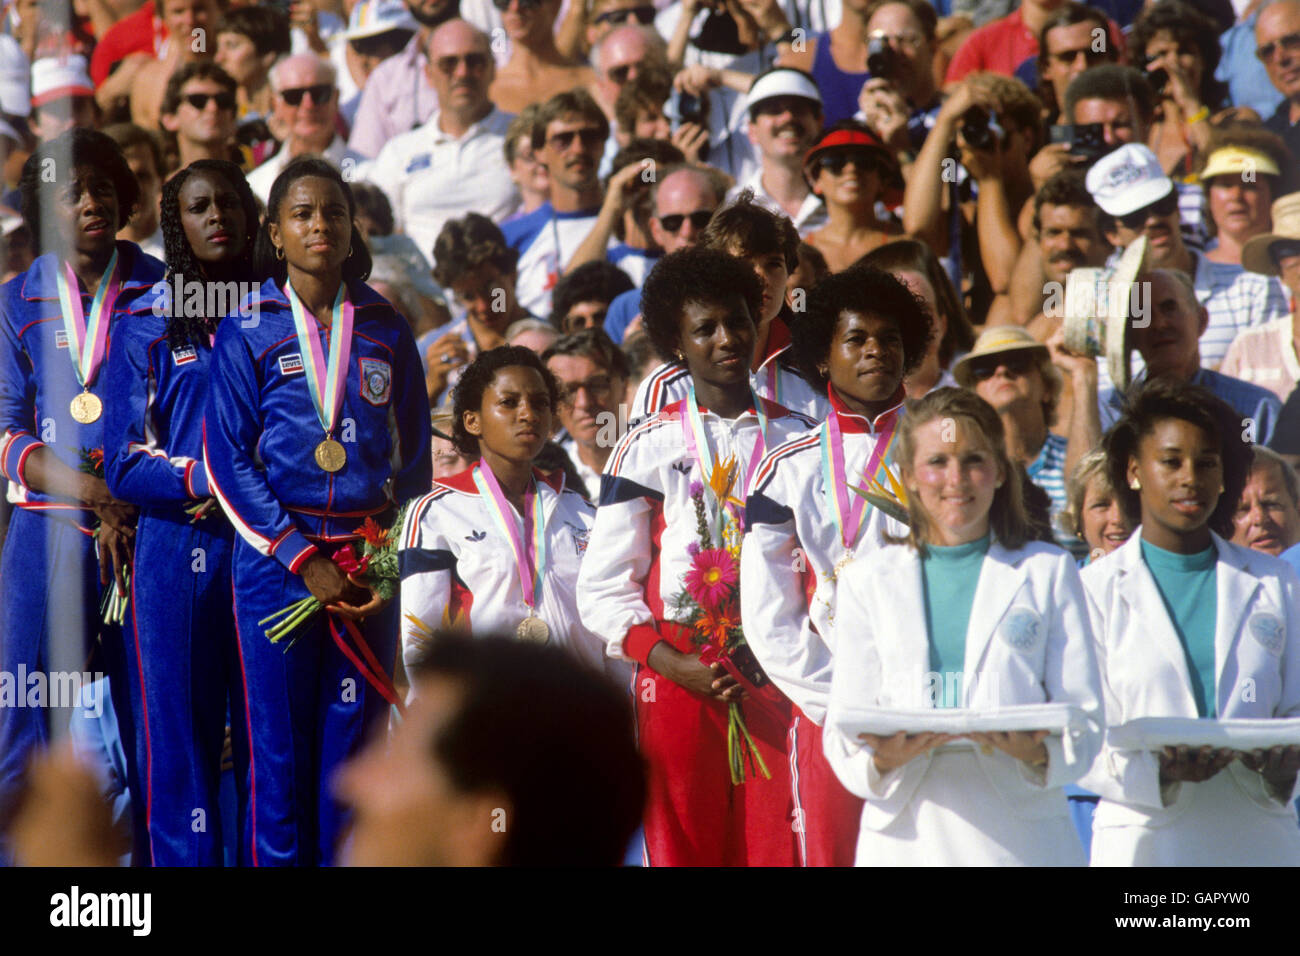 The Great Britain 4x100m relay team who won the bronze medal in the Los Angeles Olympic games. From left, in red and white tracksuits, Simone Jacobs, Beverley Goddard, Kathy Smallwood-Cook (hidden behind Goddard) and Heather Hunte. Stock Photo